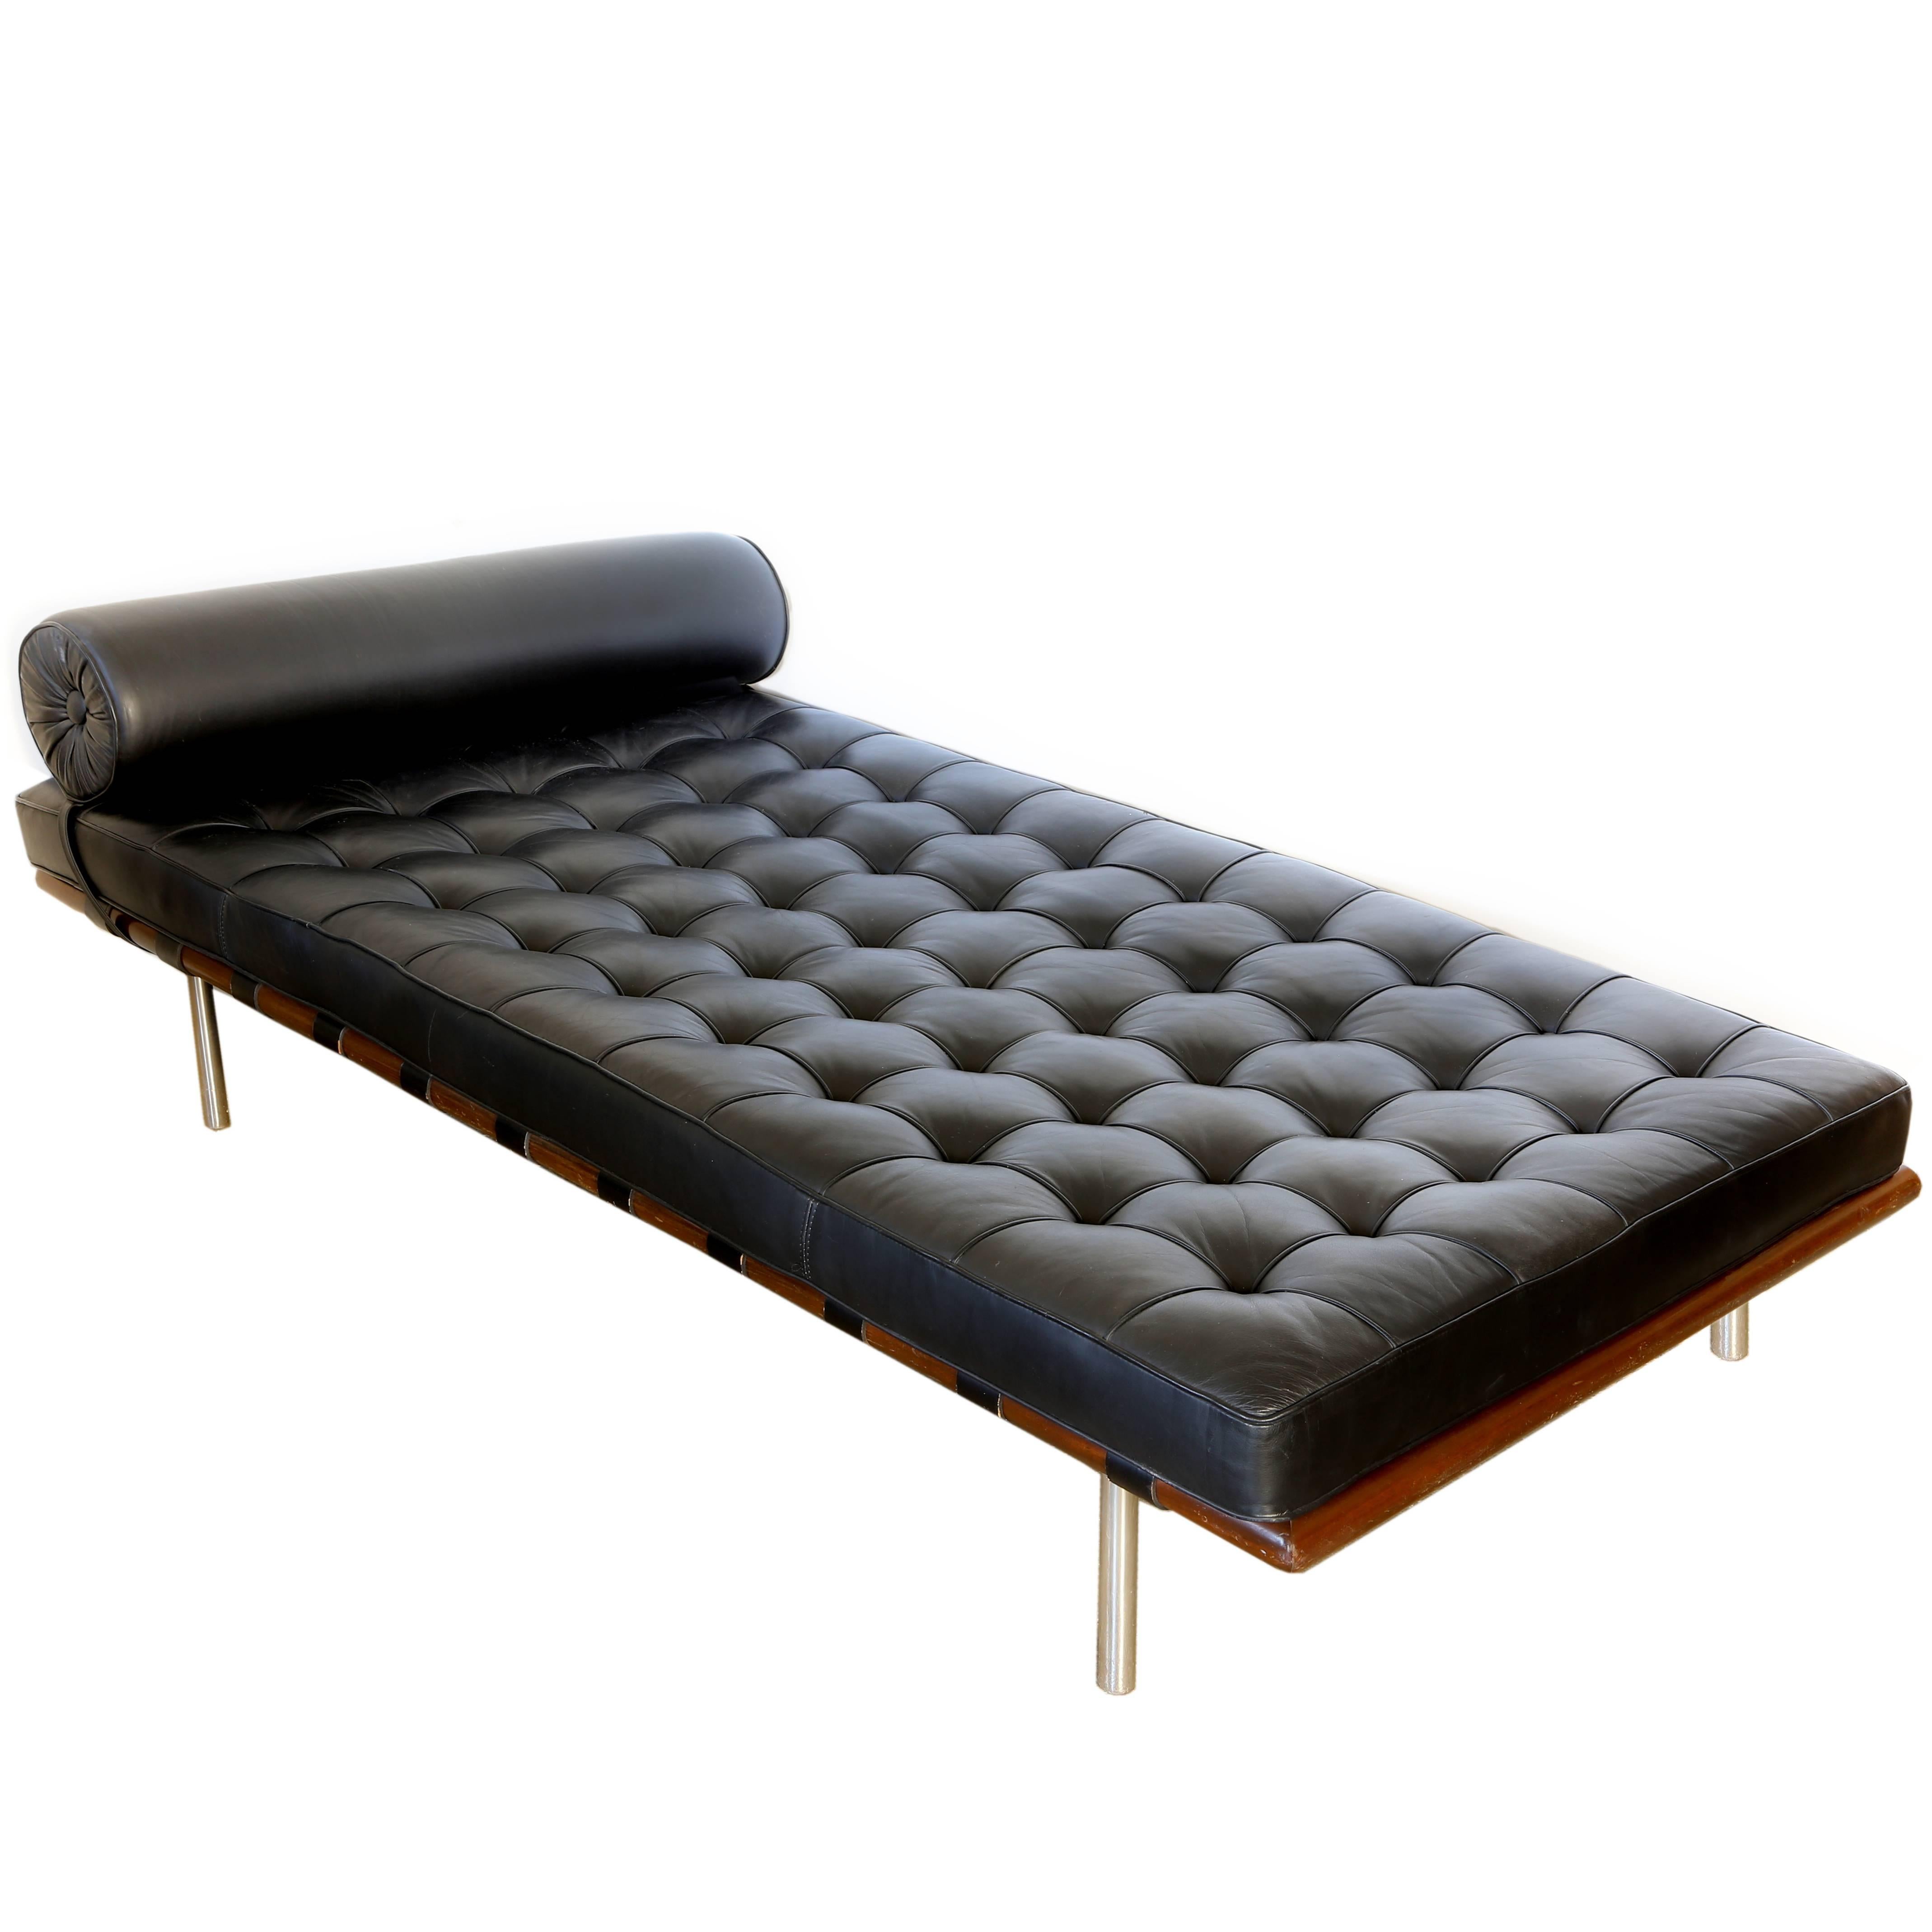 Vintage Mies van der Rohe Daybed by Knoll